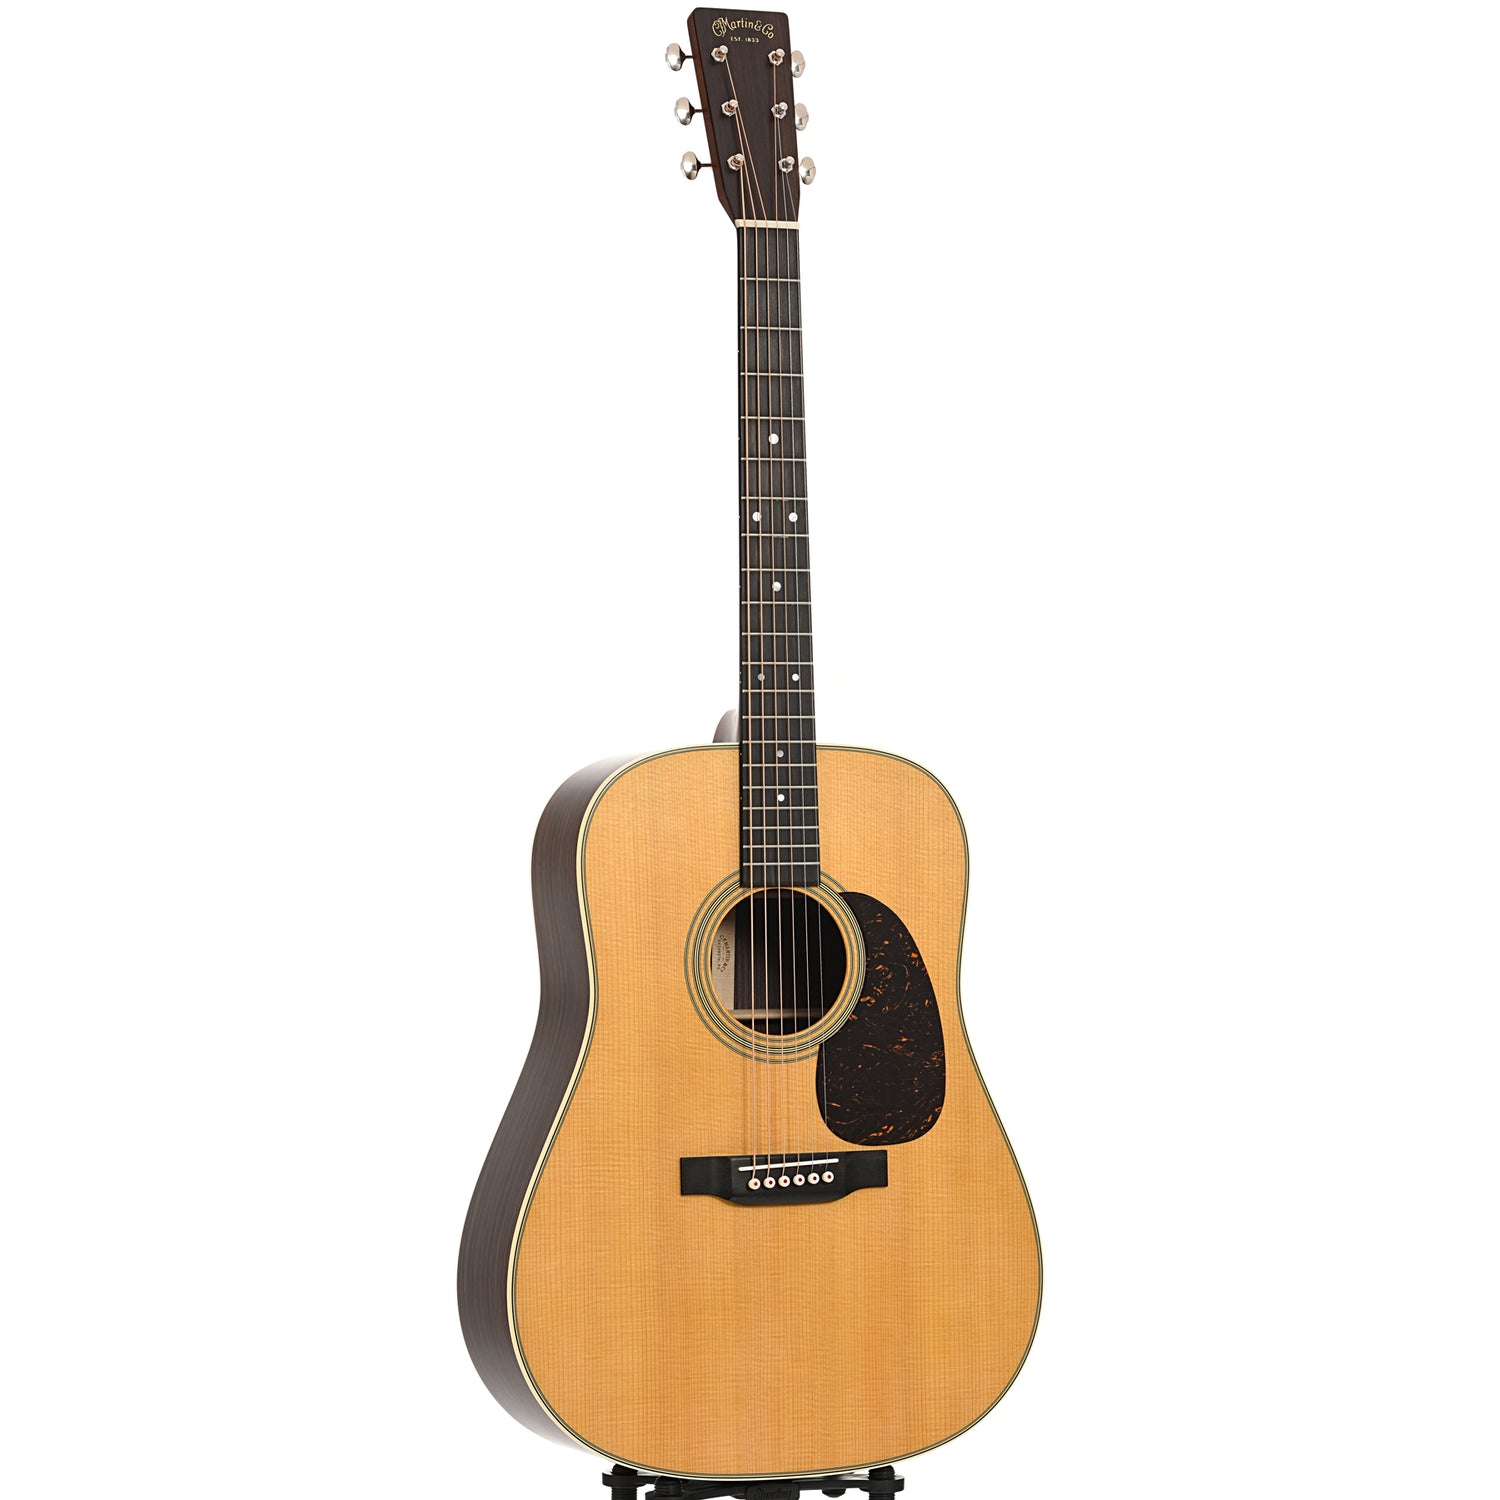 Full front and side of Martin D-28 Satin Acoustic